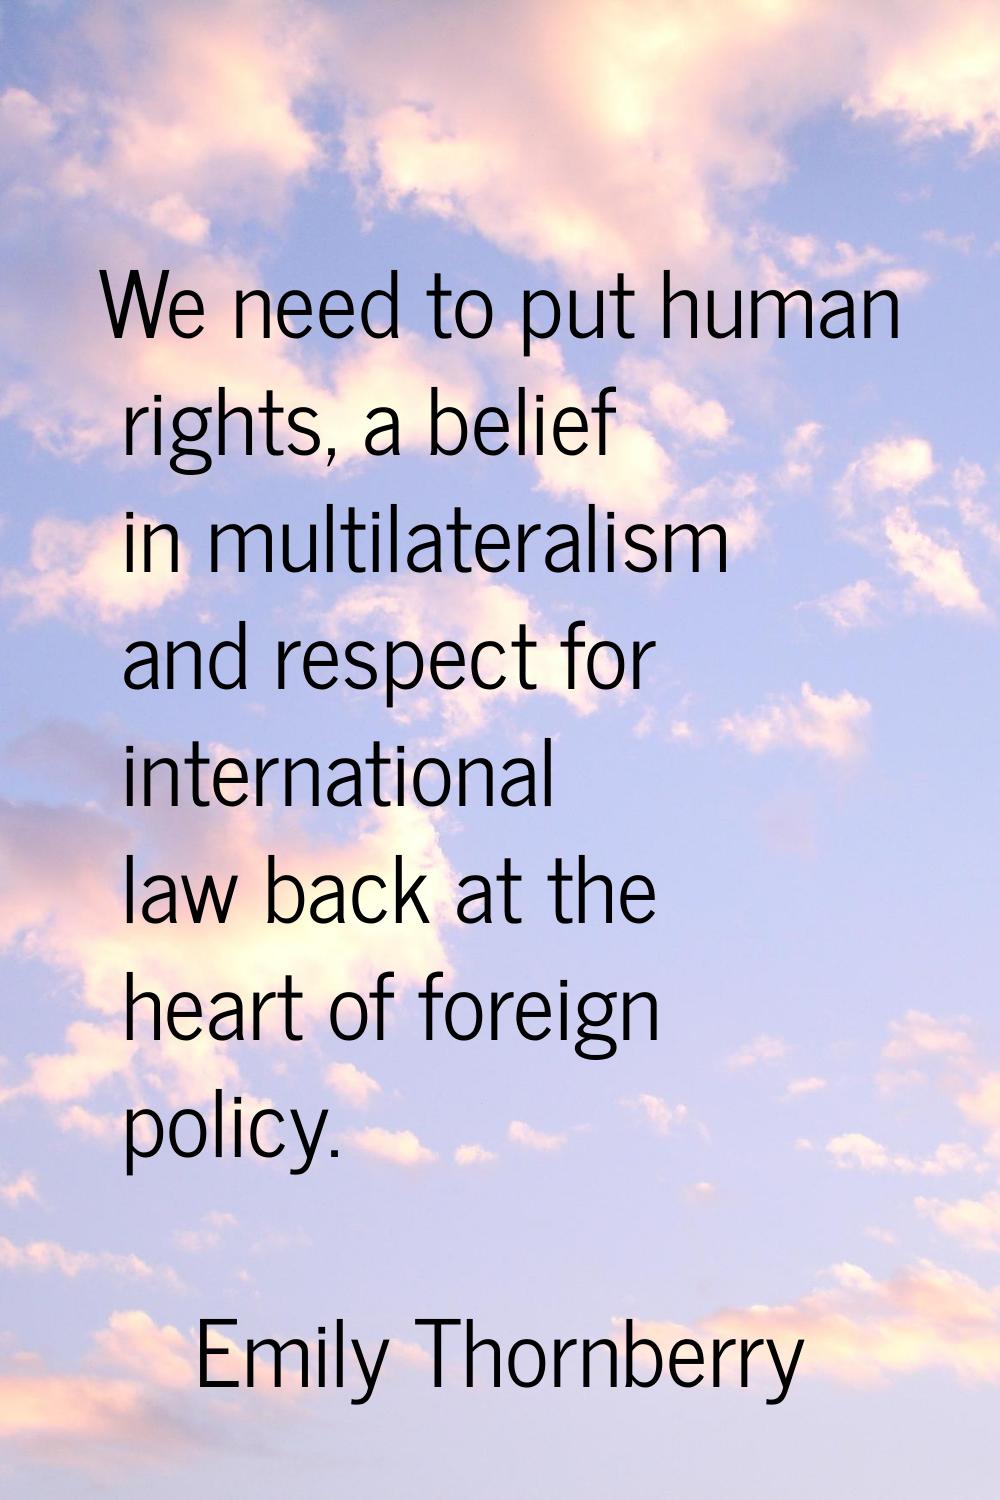 We need to put human rights, a belief in multilateralism and respect for international law back at 